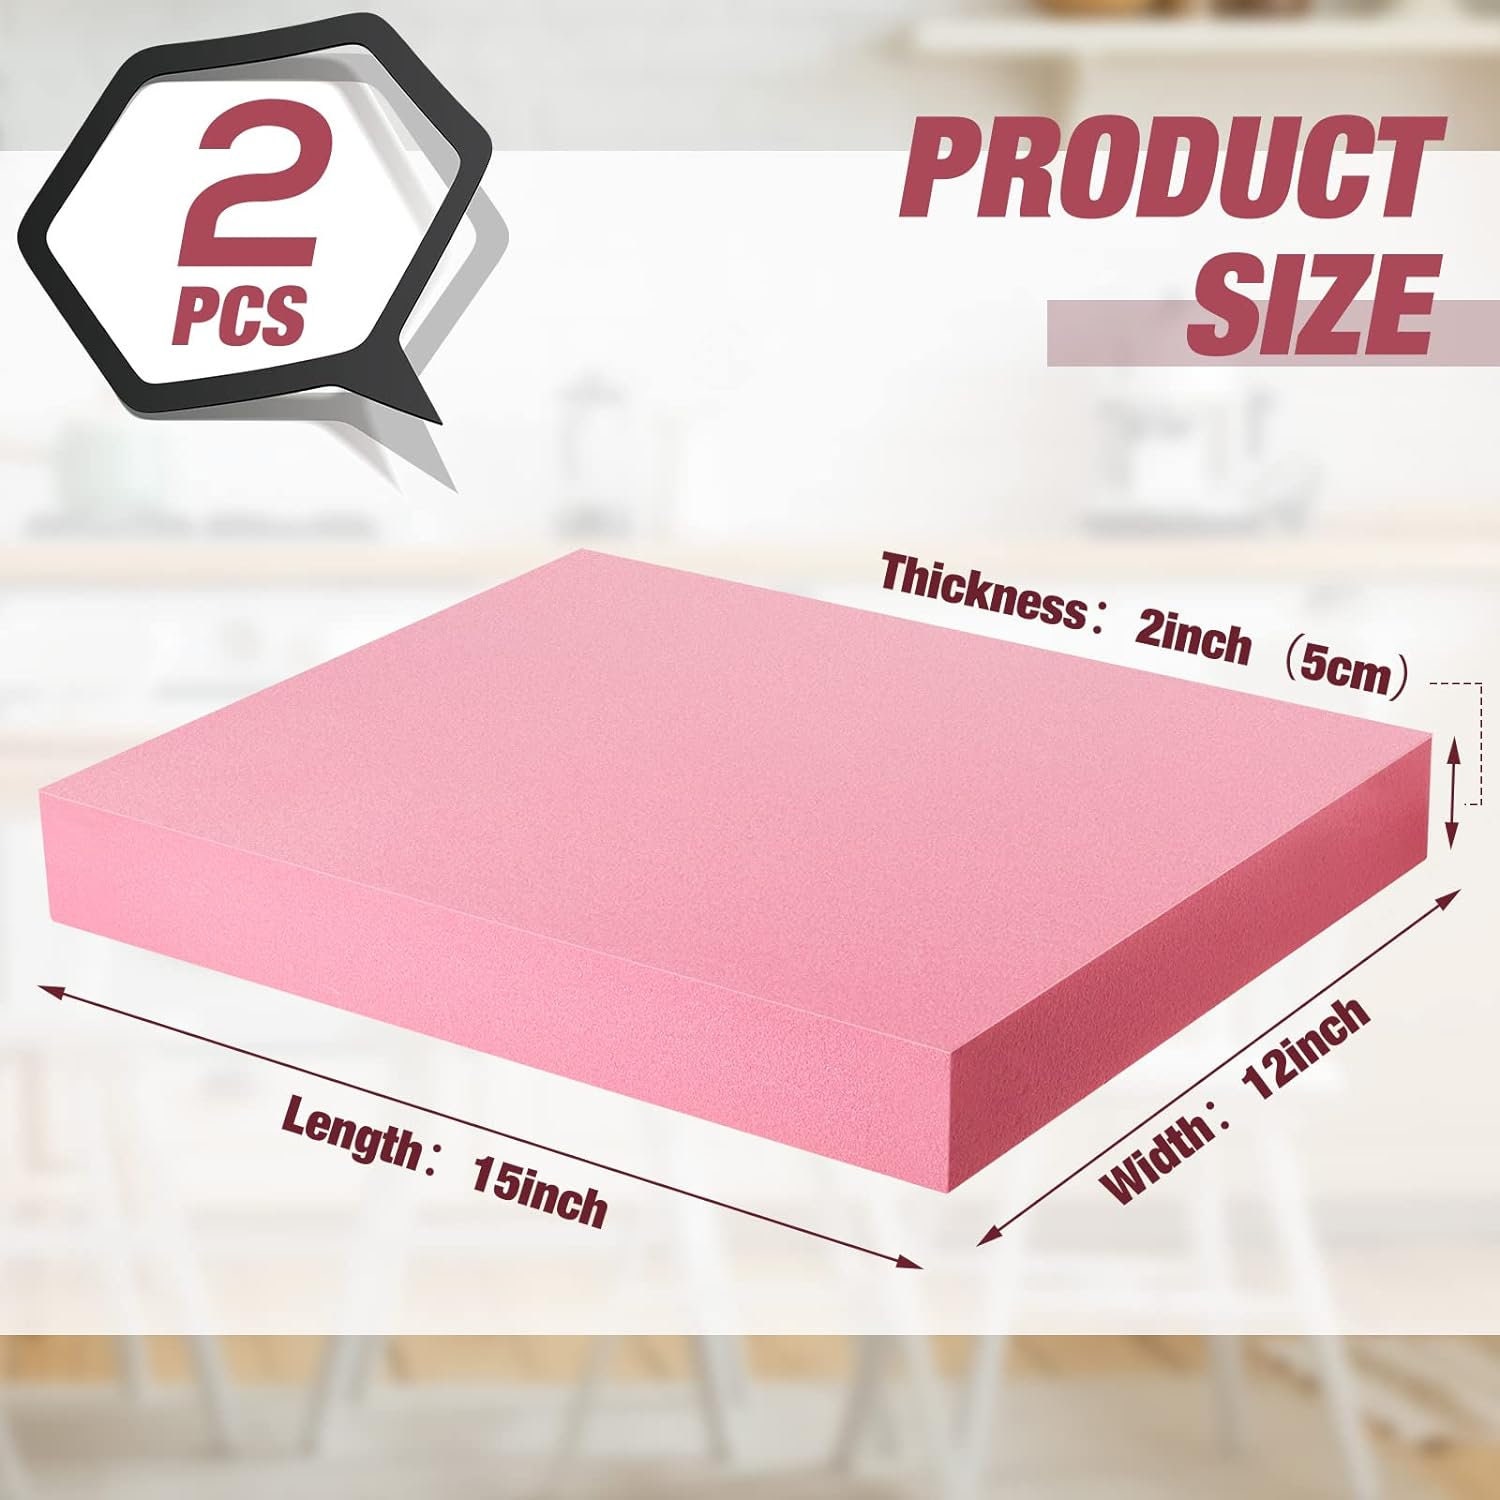 Pink Foam Board 2 Thick 2 Pieces for Craft or Home 